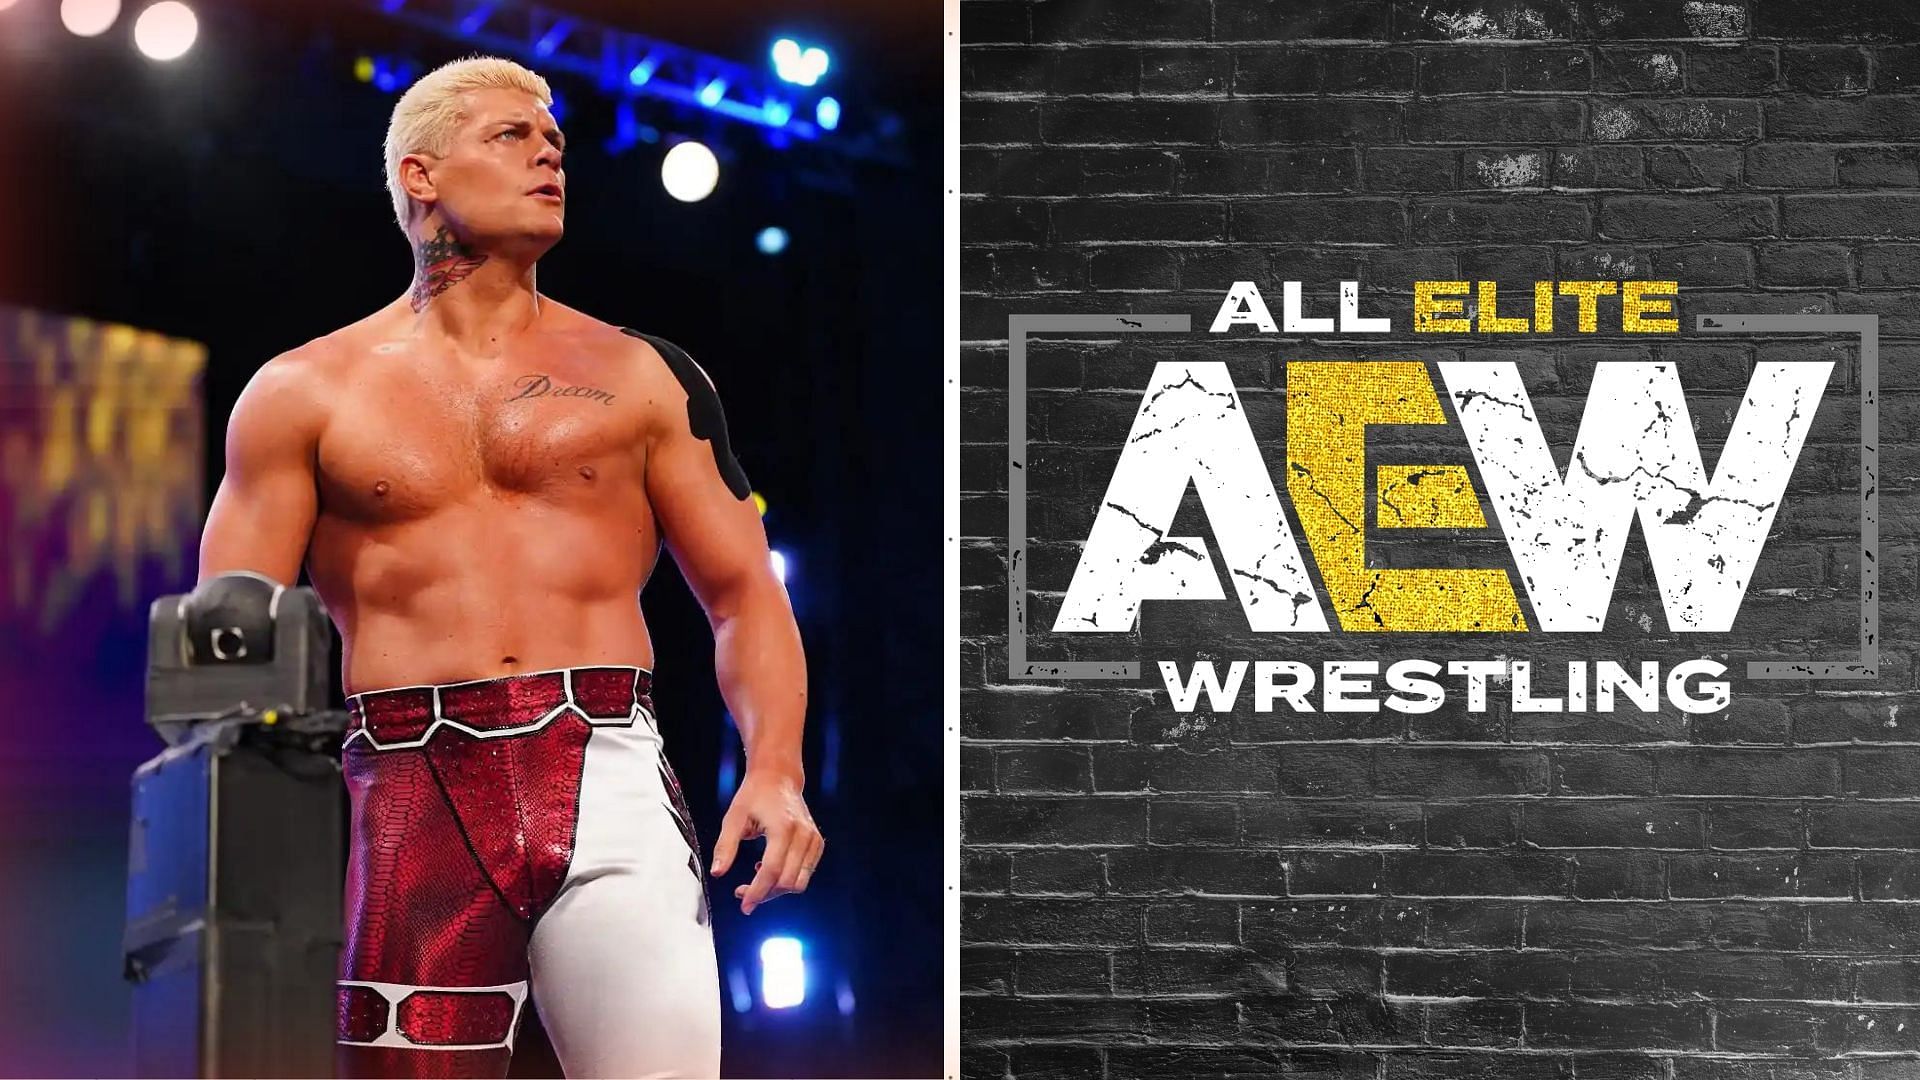 Cody Rhodes was the Executive Vice President of AEW